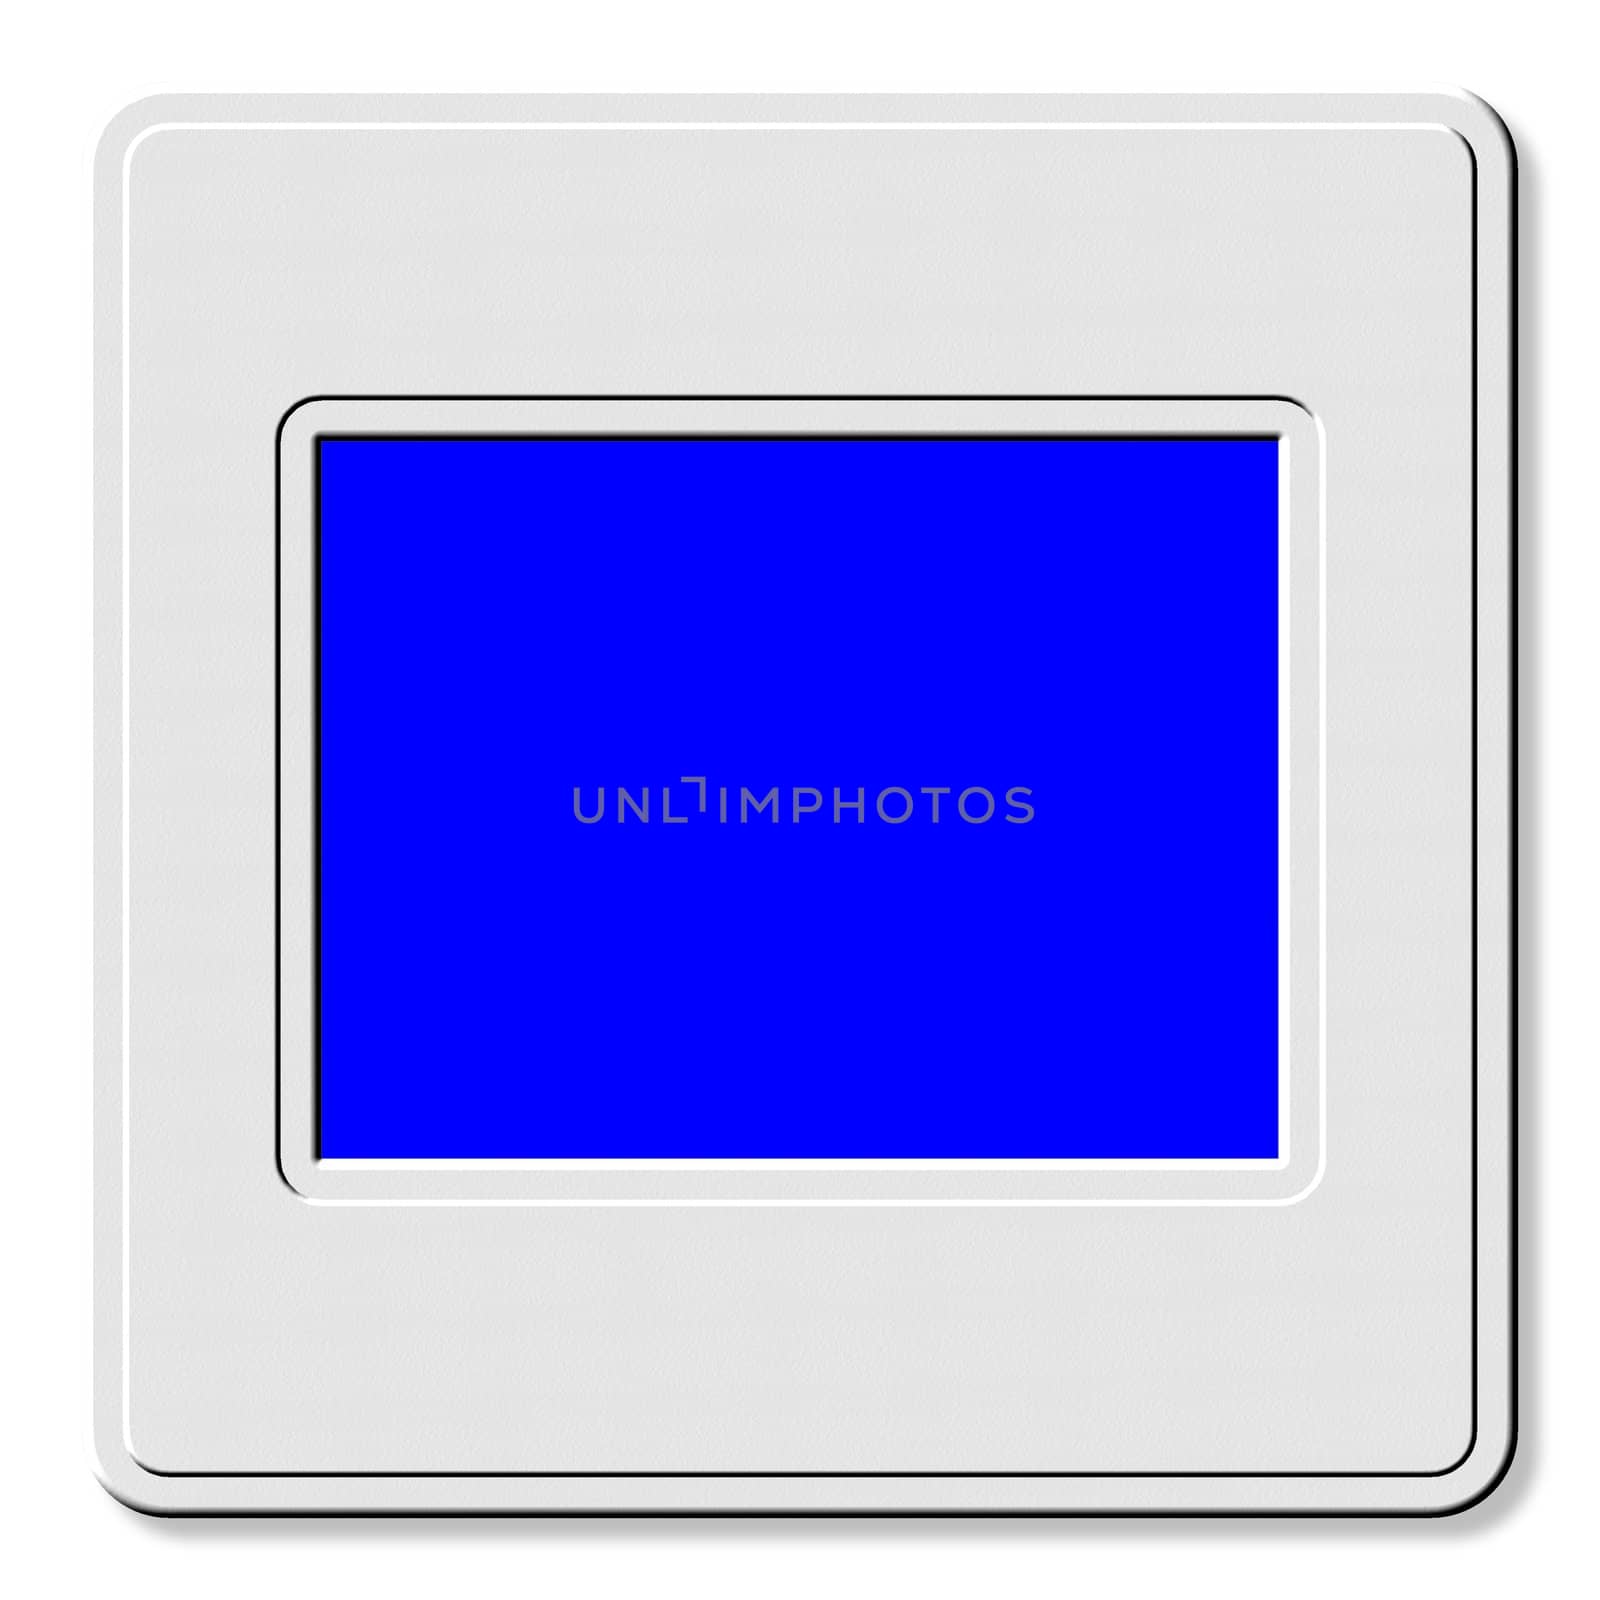 a photo frame for image format 4:3